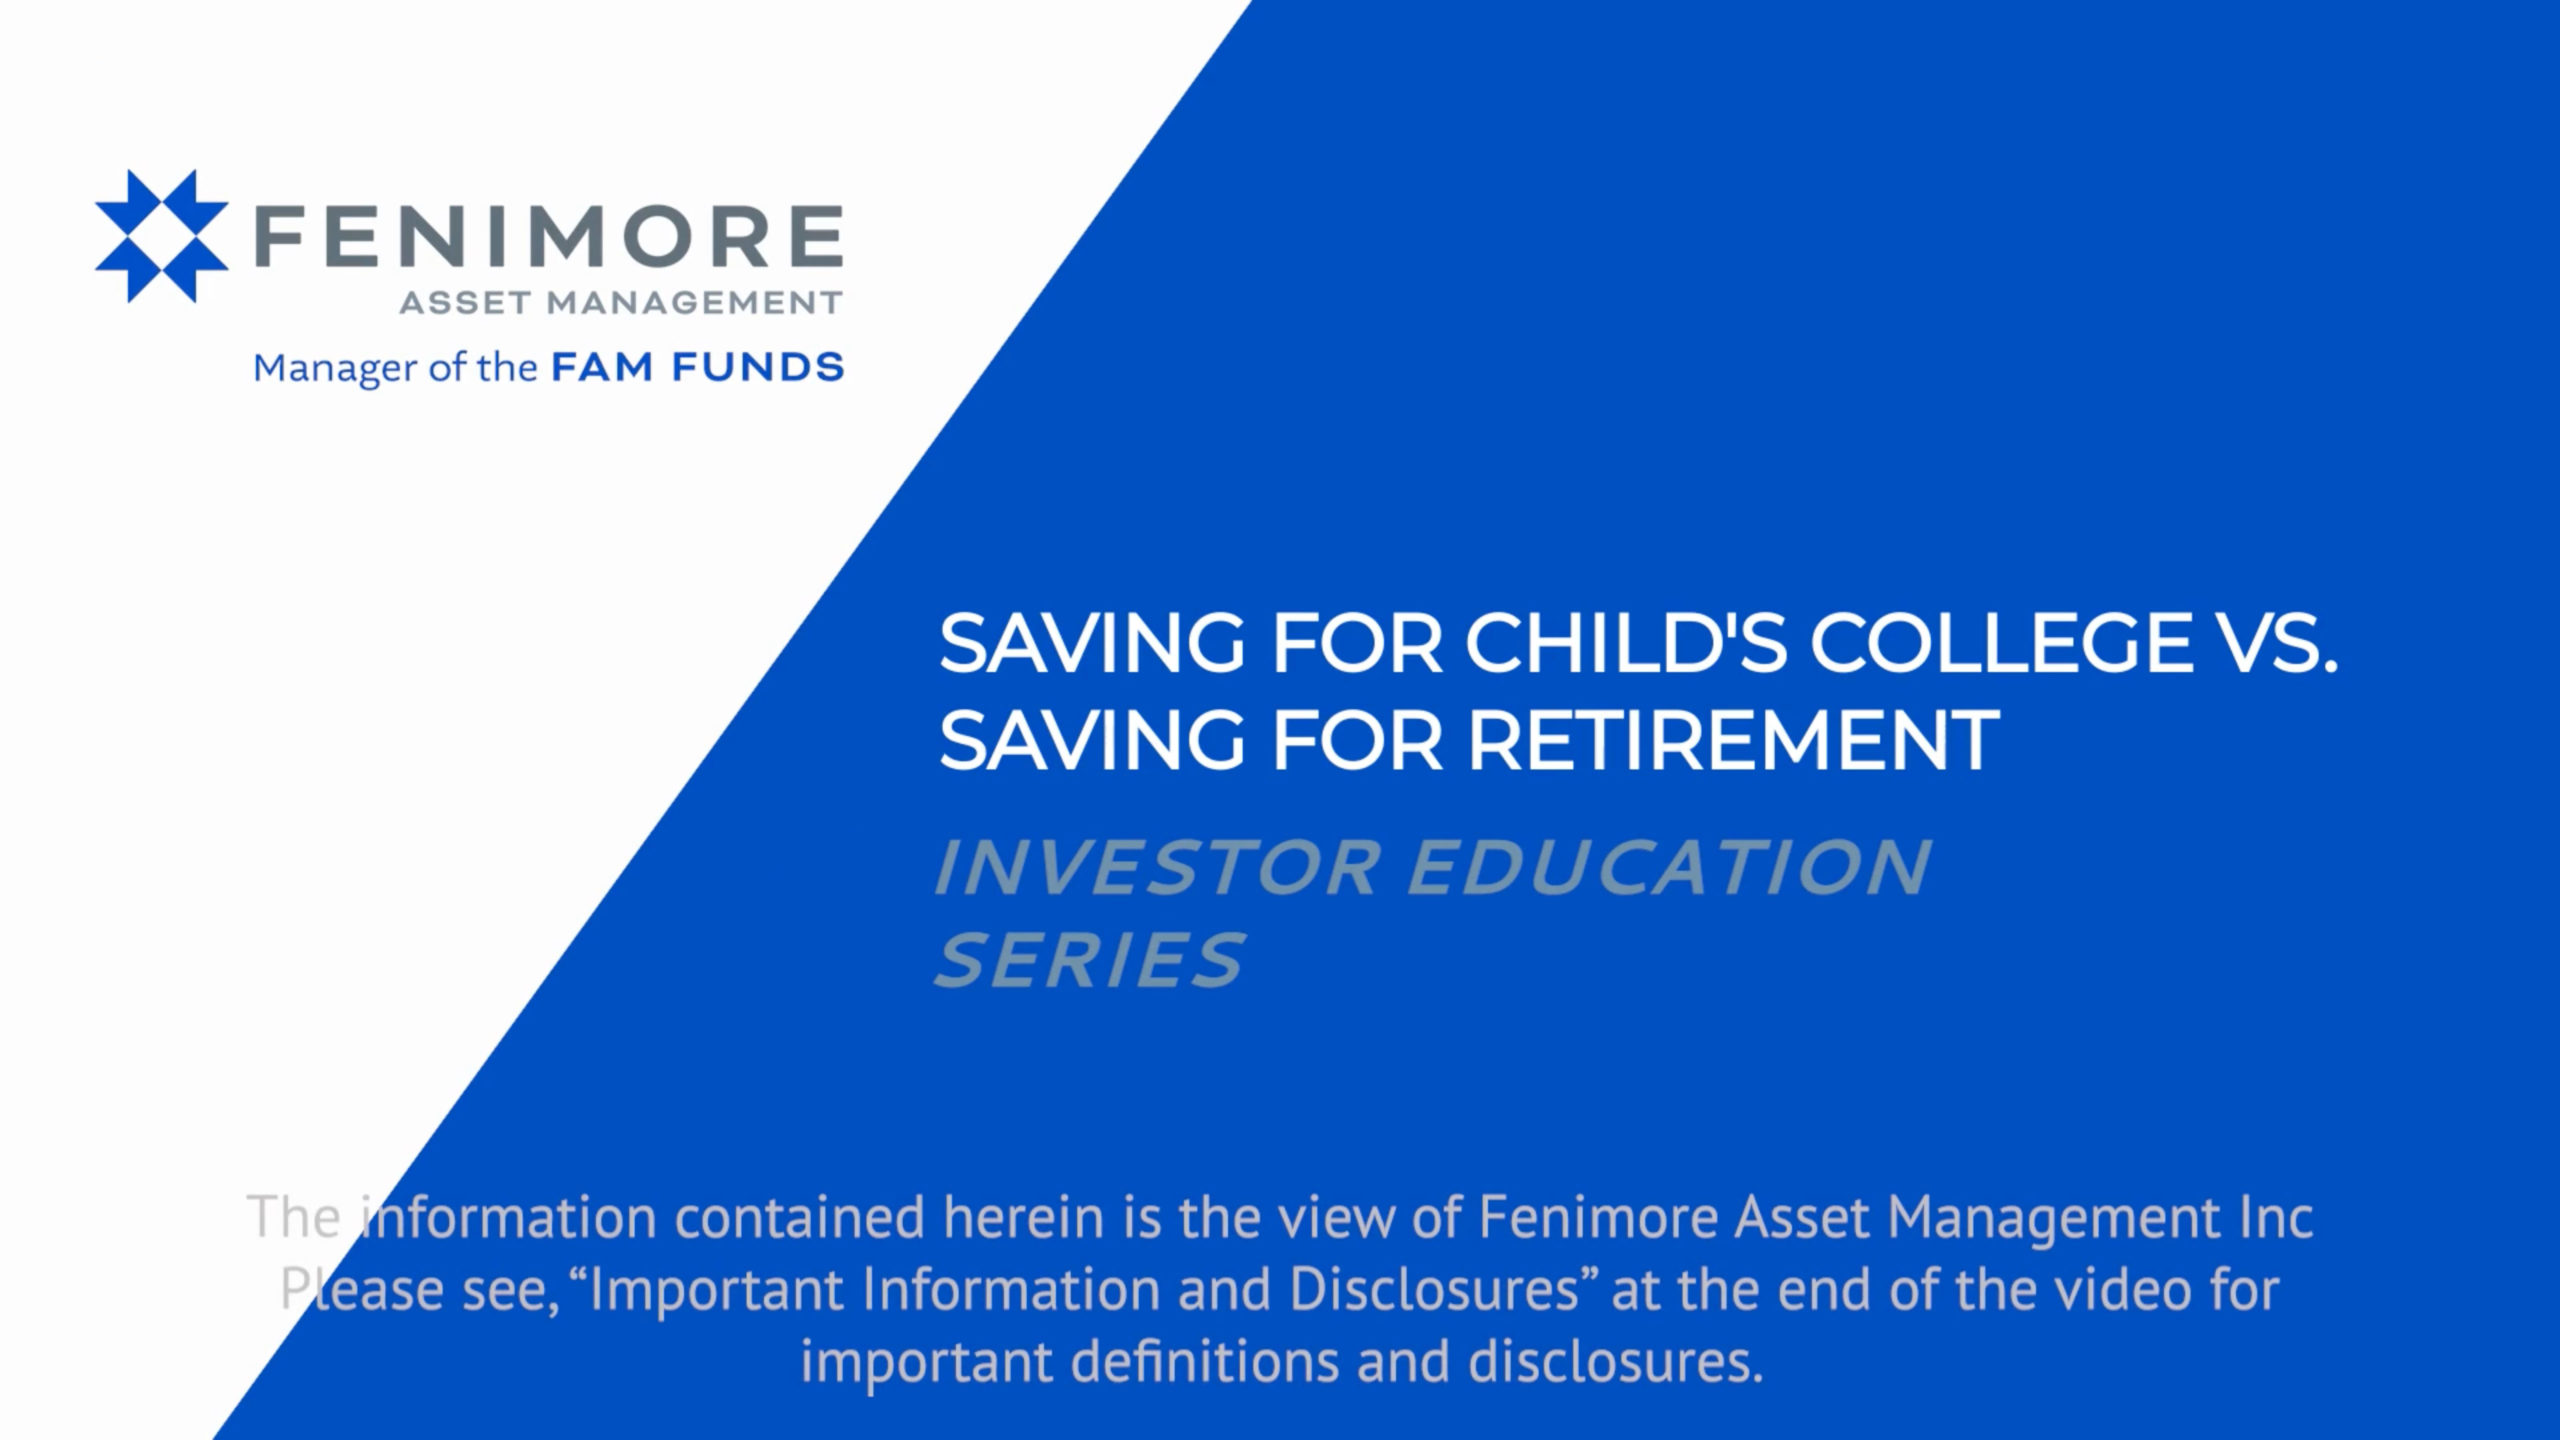 Saving for a Child’s College vs. Saving for Retirement